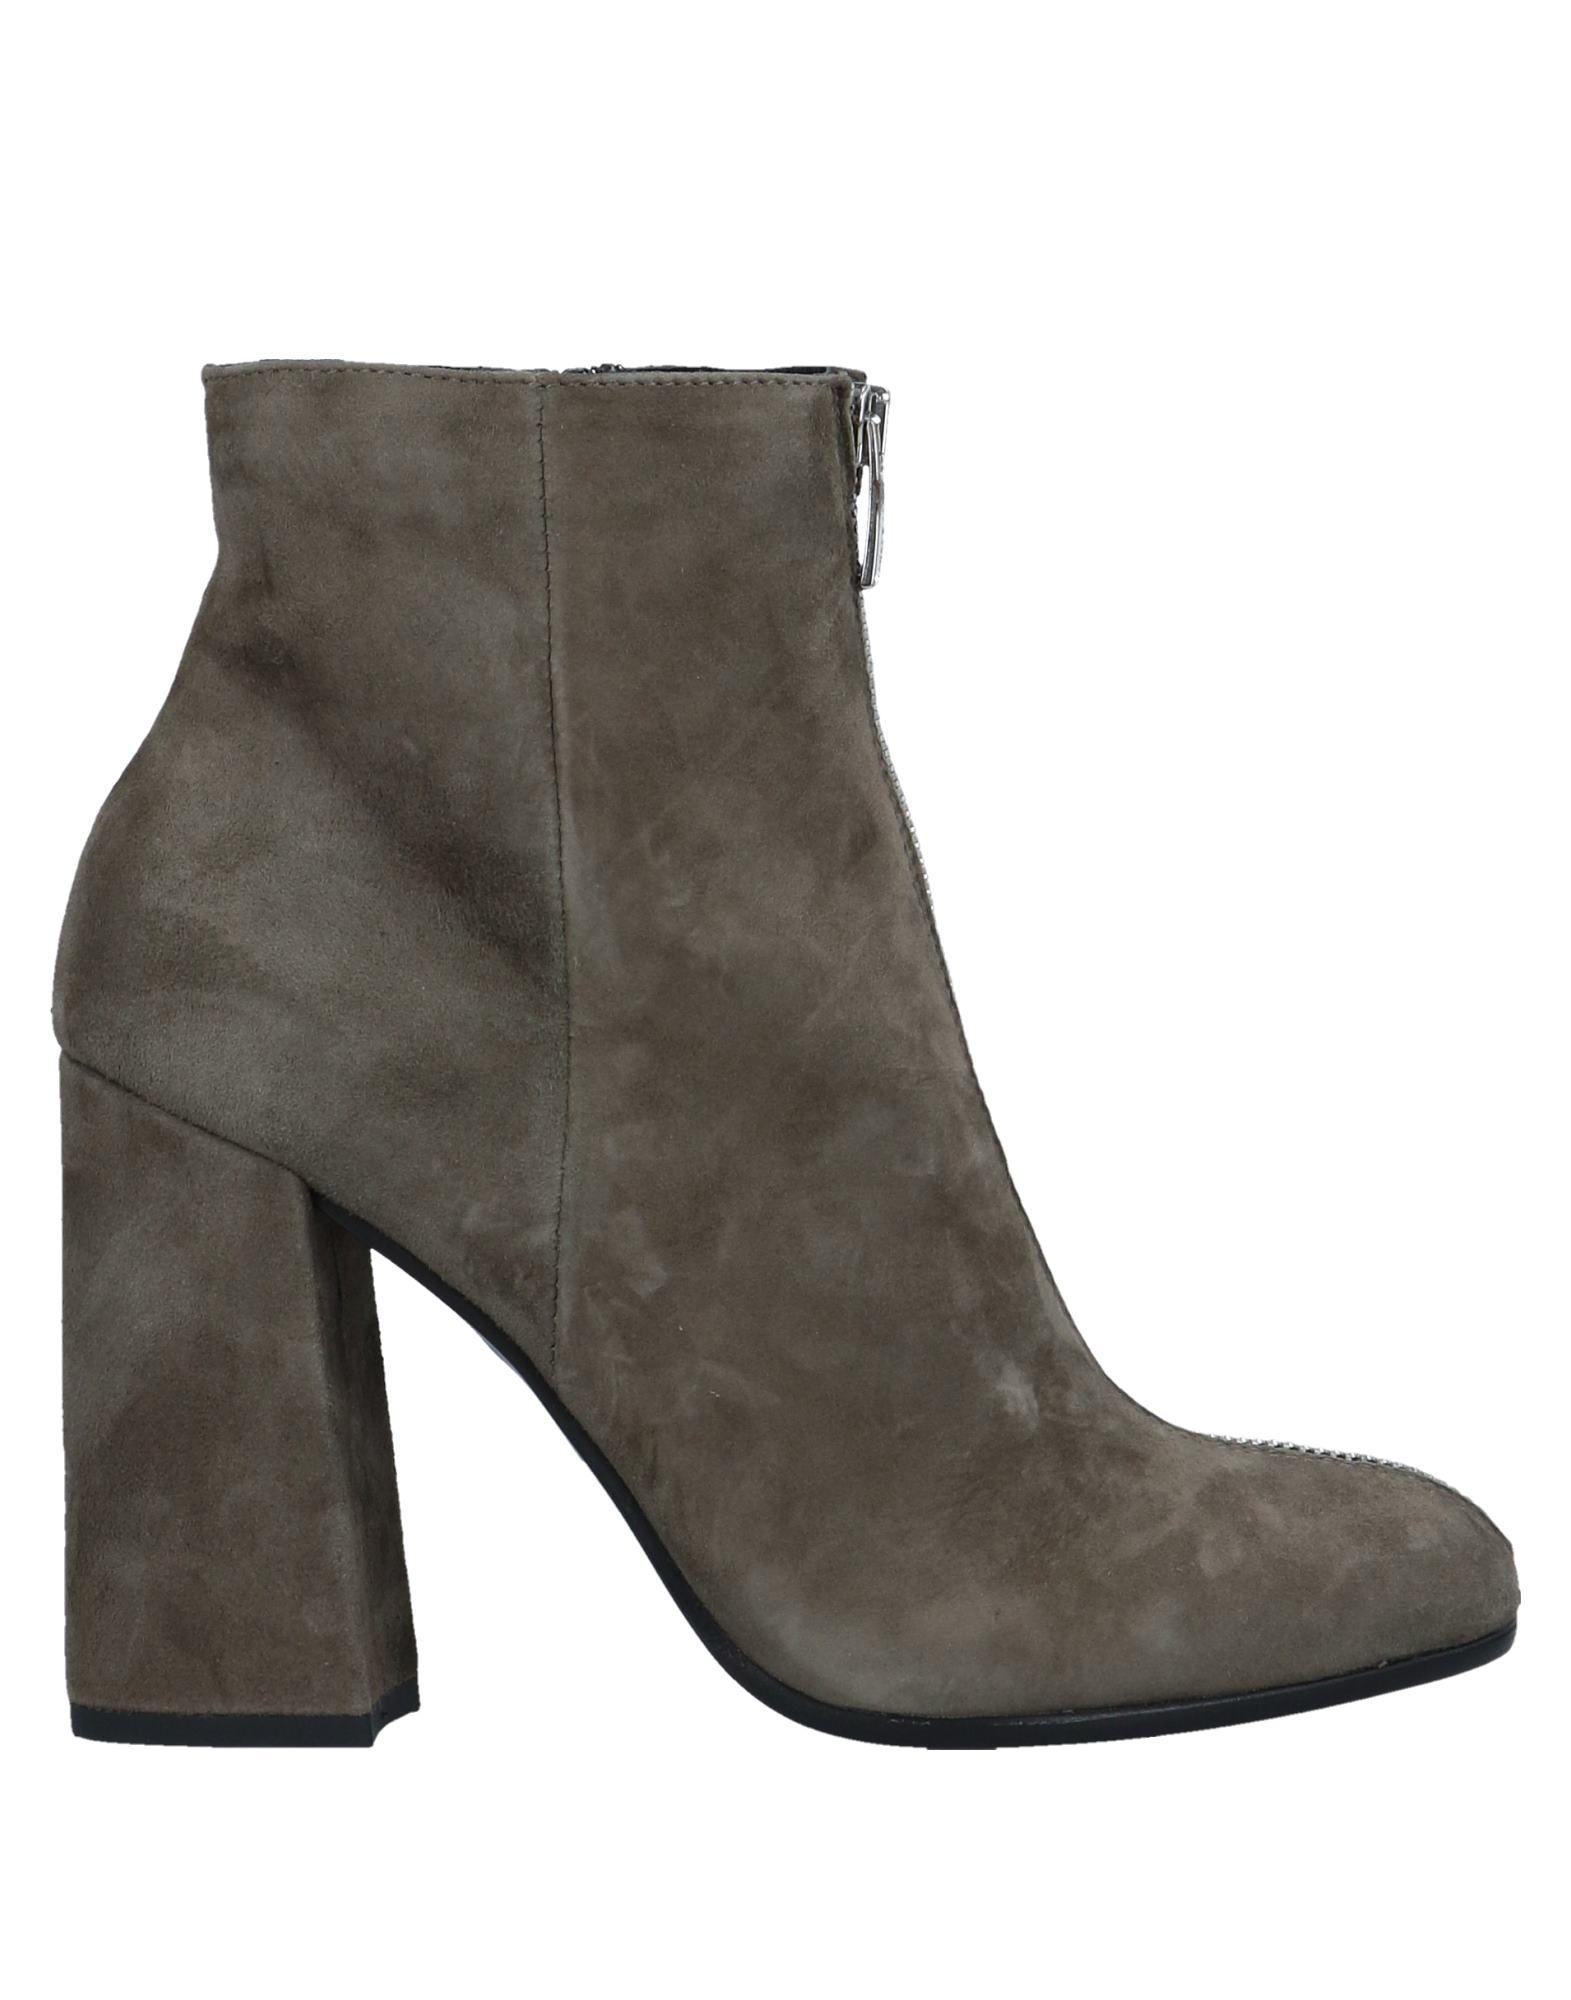 Janet & Janet Leather Ankle Boots in Military Green (Green) - Lyst